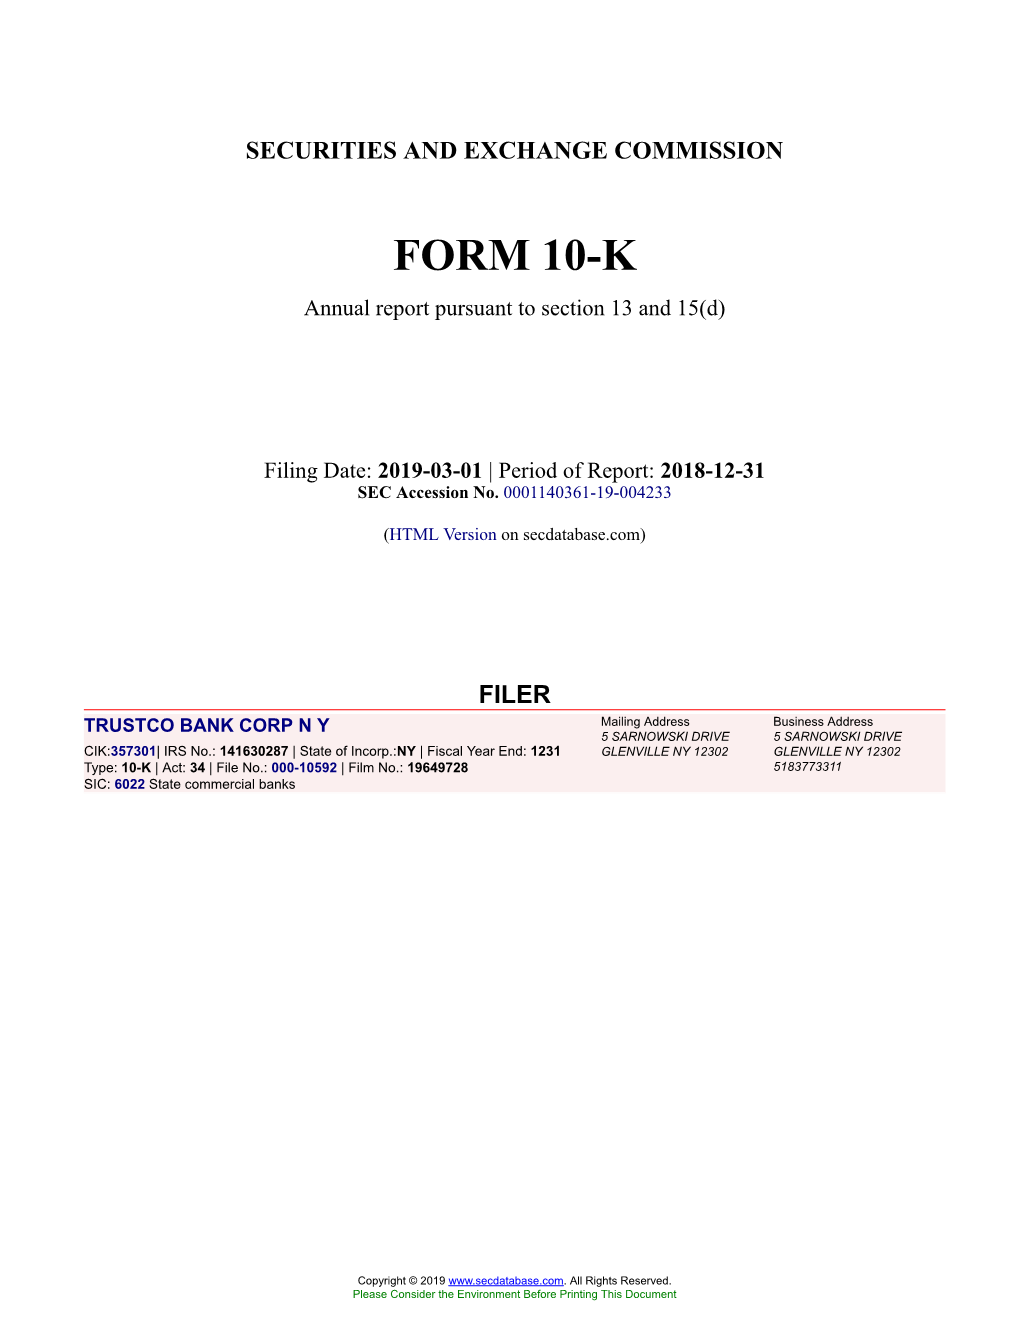 TRUSTCO BANK CORP N Y Form 10-K Annual Report Filed 2019-03-01